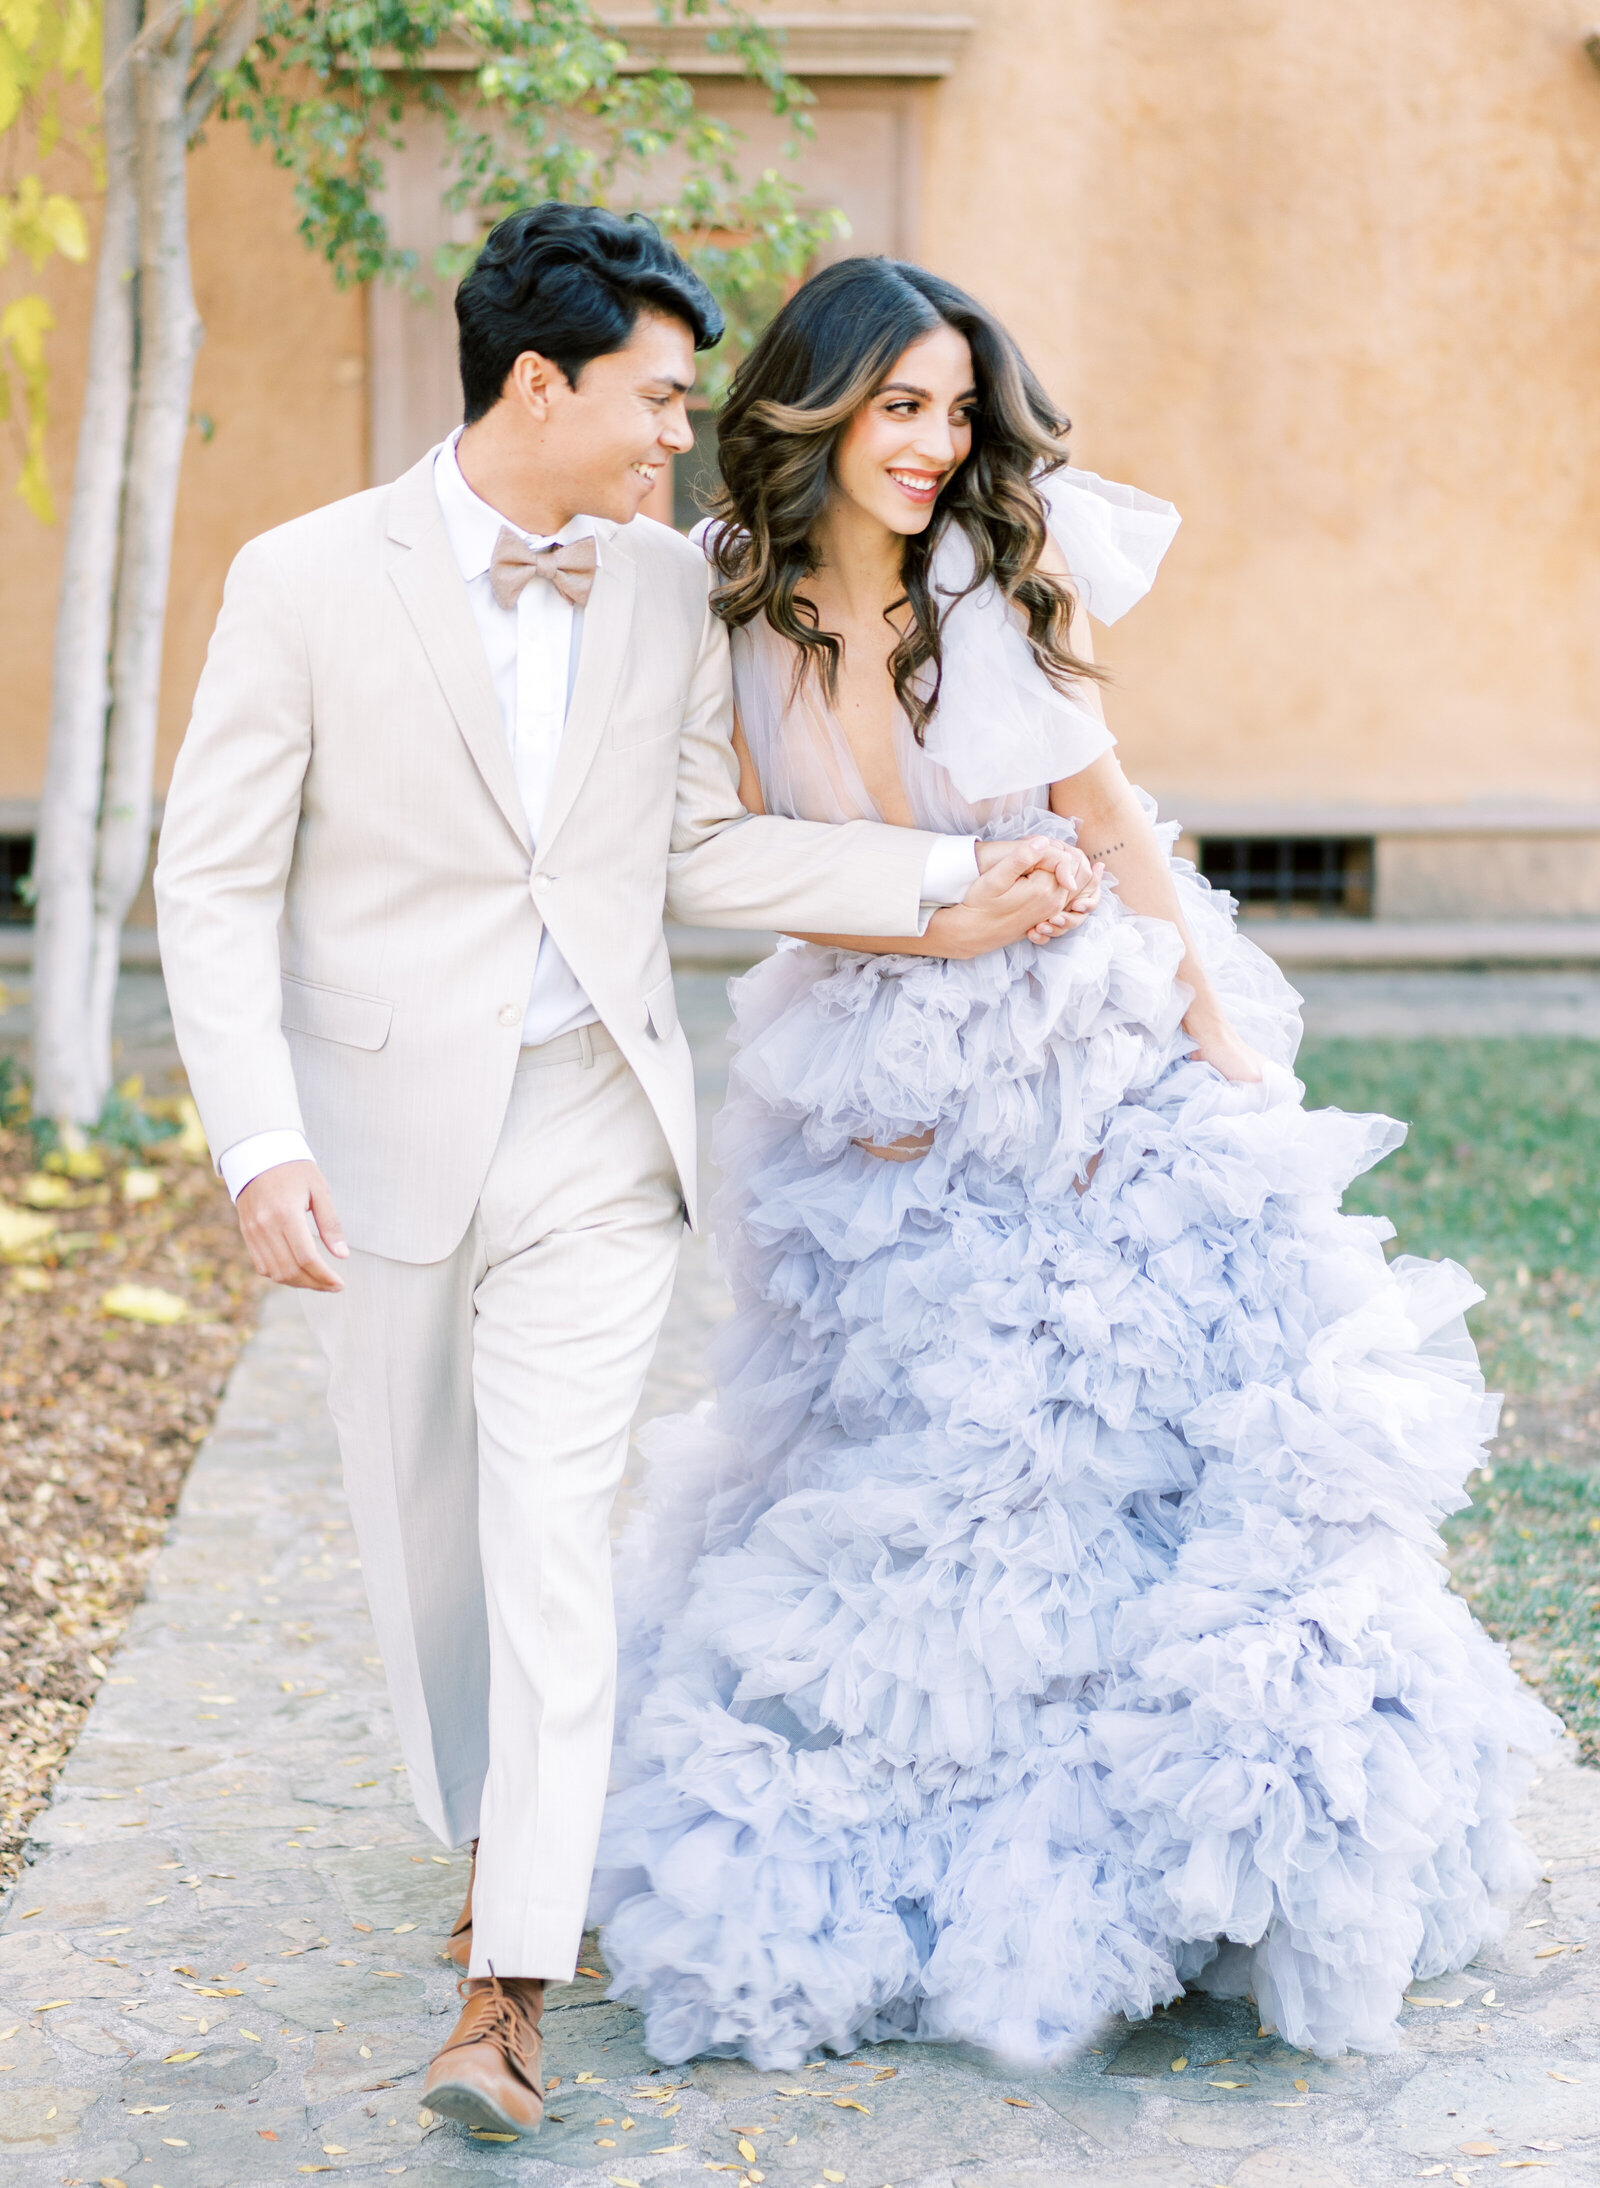 Portrait of bride and groom in a lavender gown and cream suit walking outdoors by a peach-colored structure.